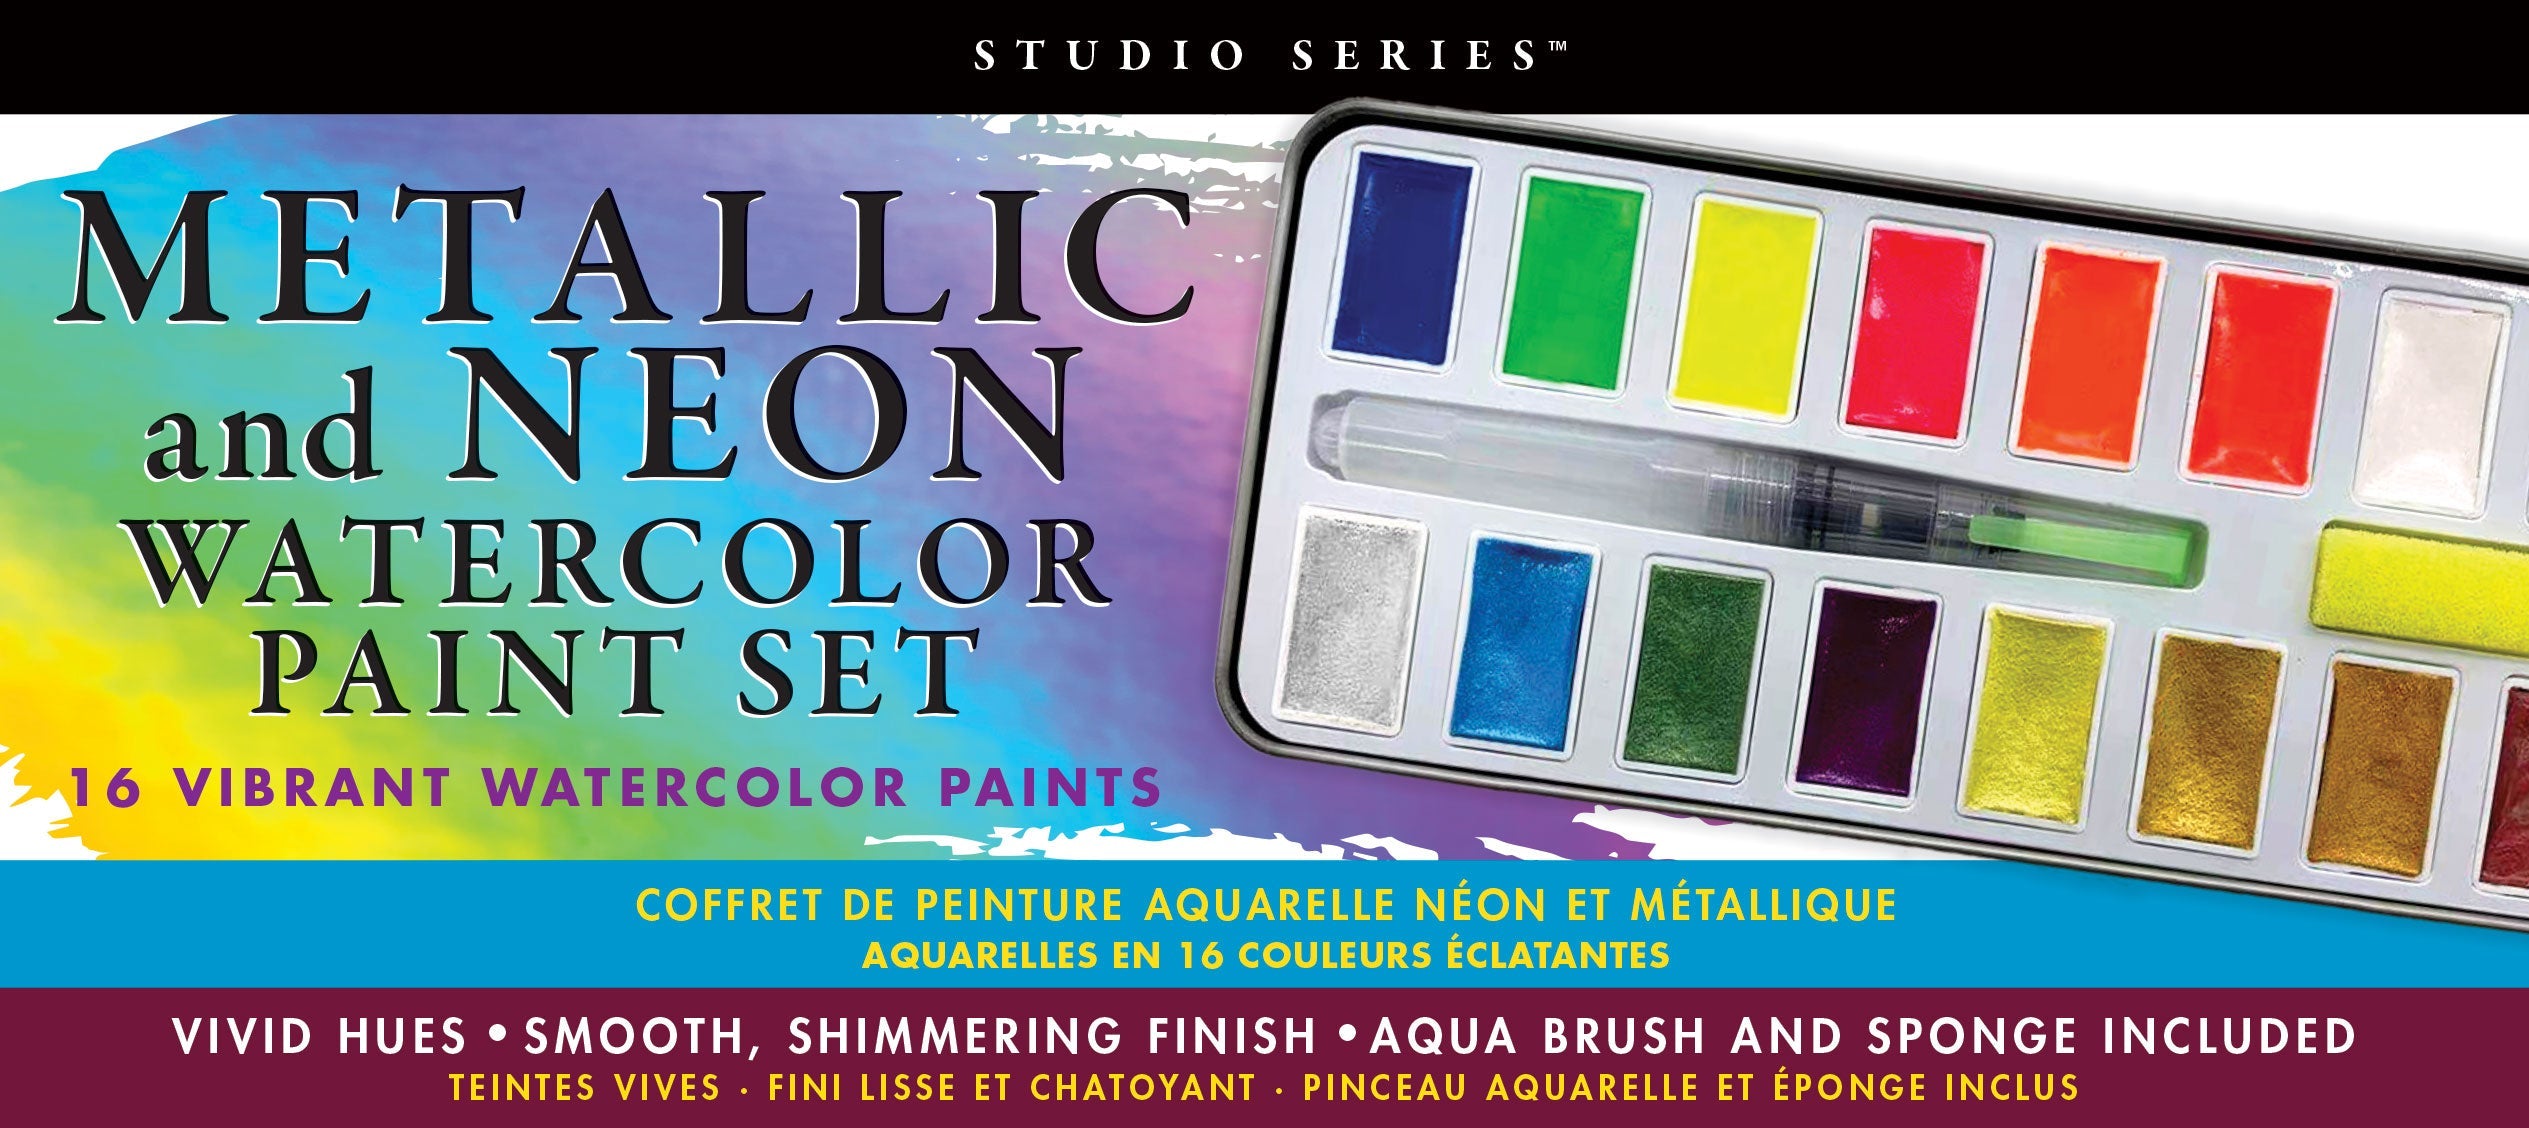 Professional Watercolor Paint Set Classico - Non-Toxic 12 Half-Pan Set in Metal Tin Palette - Portable Travel Watercolor Set for Adults - Vibrant